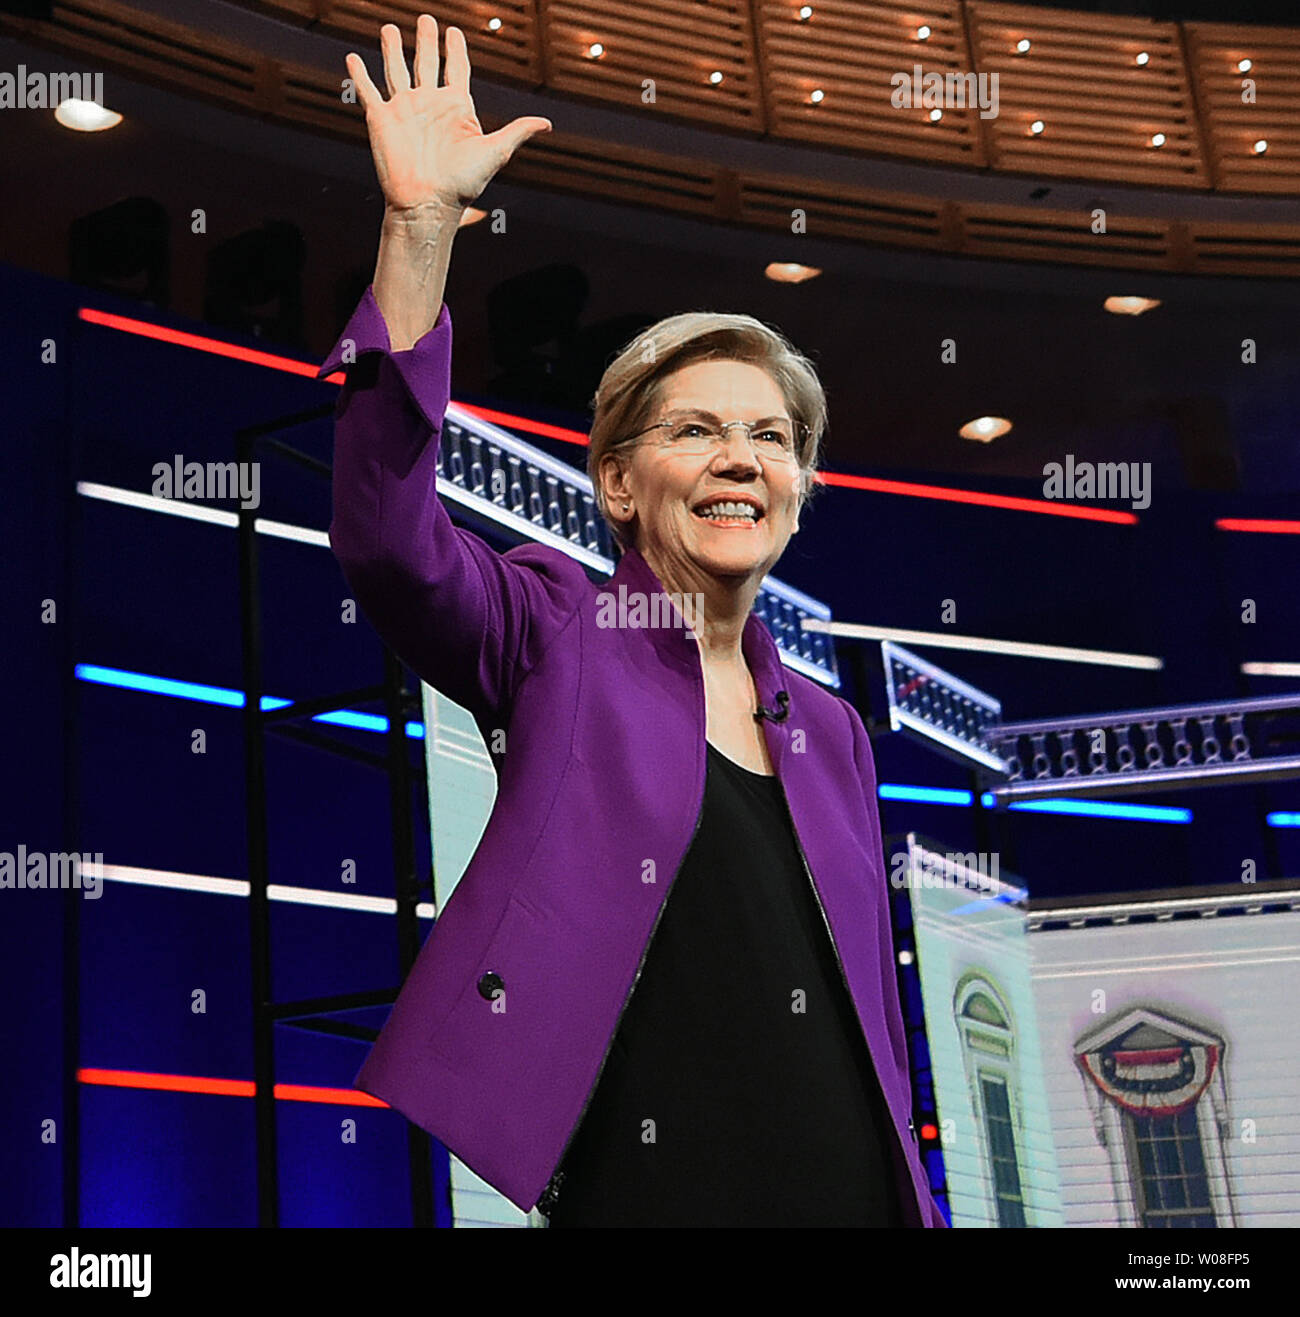 Miami, United States. 26th June, 2019. Democratic presidential candidate Elizabeth Warren takes the stage at the start of the first Democratic presidential primary debate for the 2020 election on June 26, 2019 at the Knight Concert Hall at the Adrienne Arsht Center for the Performing Arts in Miami, Florida. Credit: Paul Hennessy/Alamy Live News Stock Photo